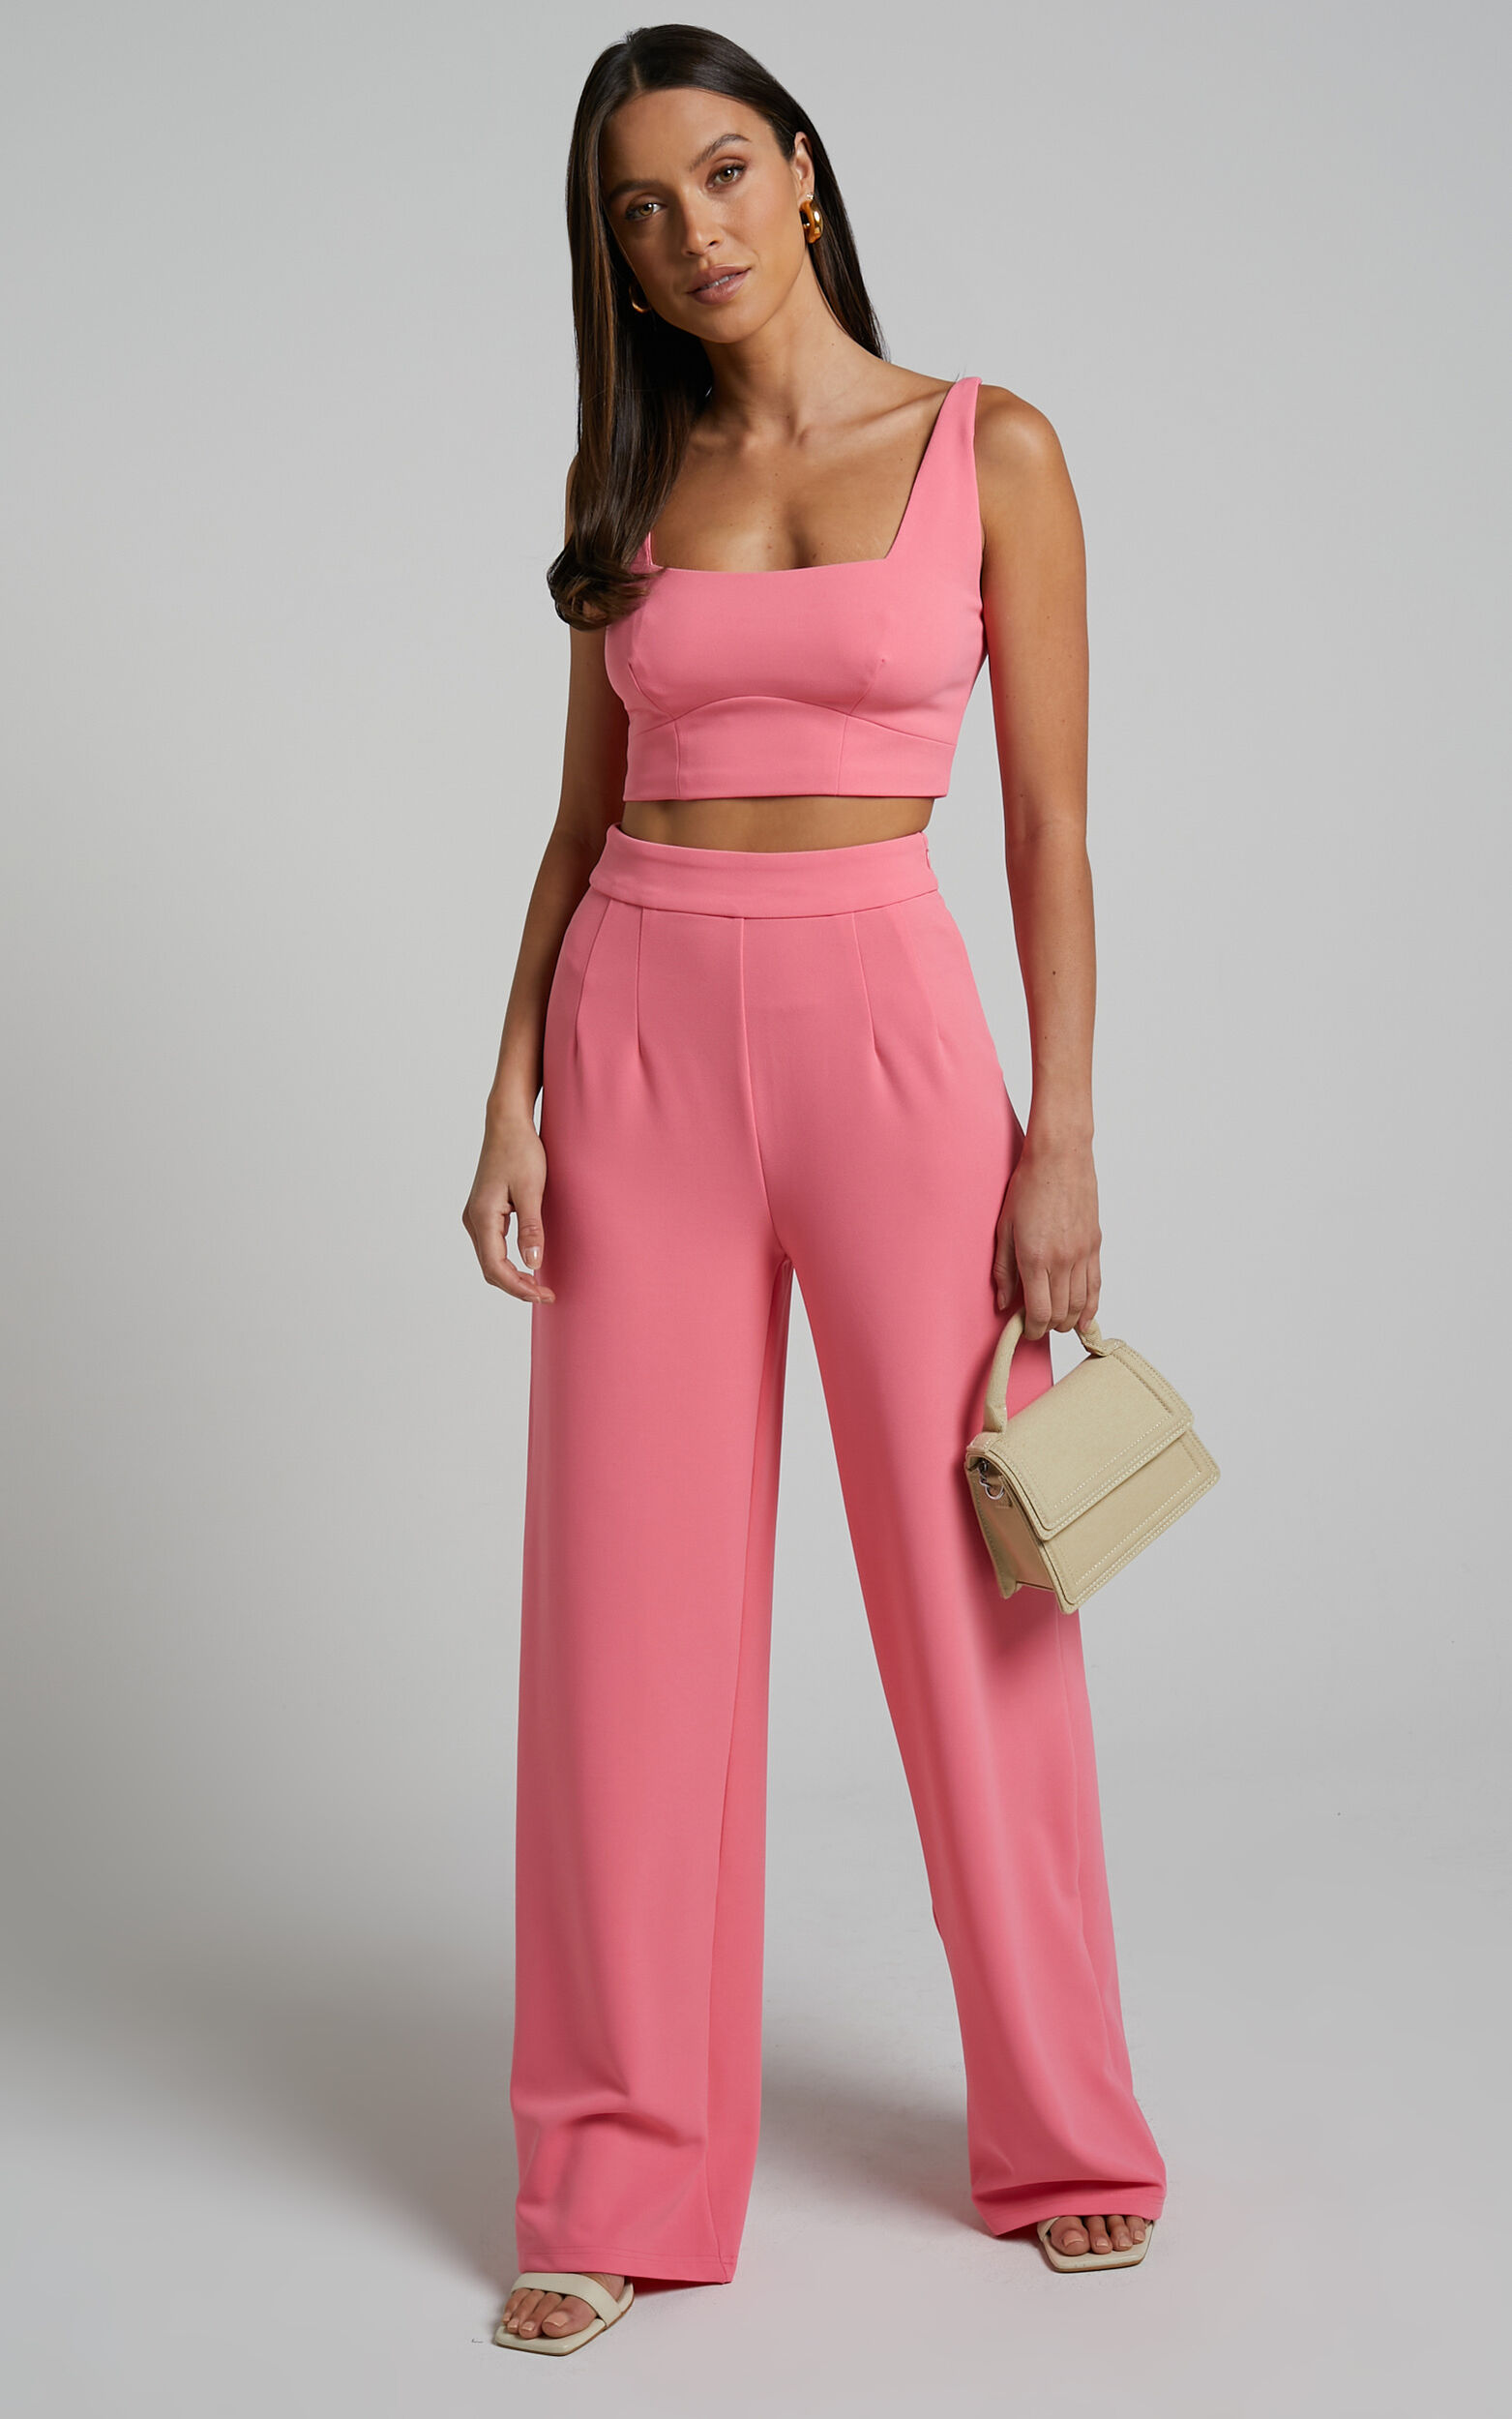 Elibeth Two Piece Set - Crop Top and High Waisted Wide Leg Pants Set in Bubblegum Pink - 04, PNK2